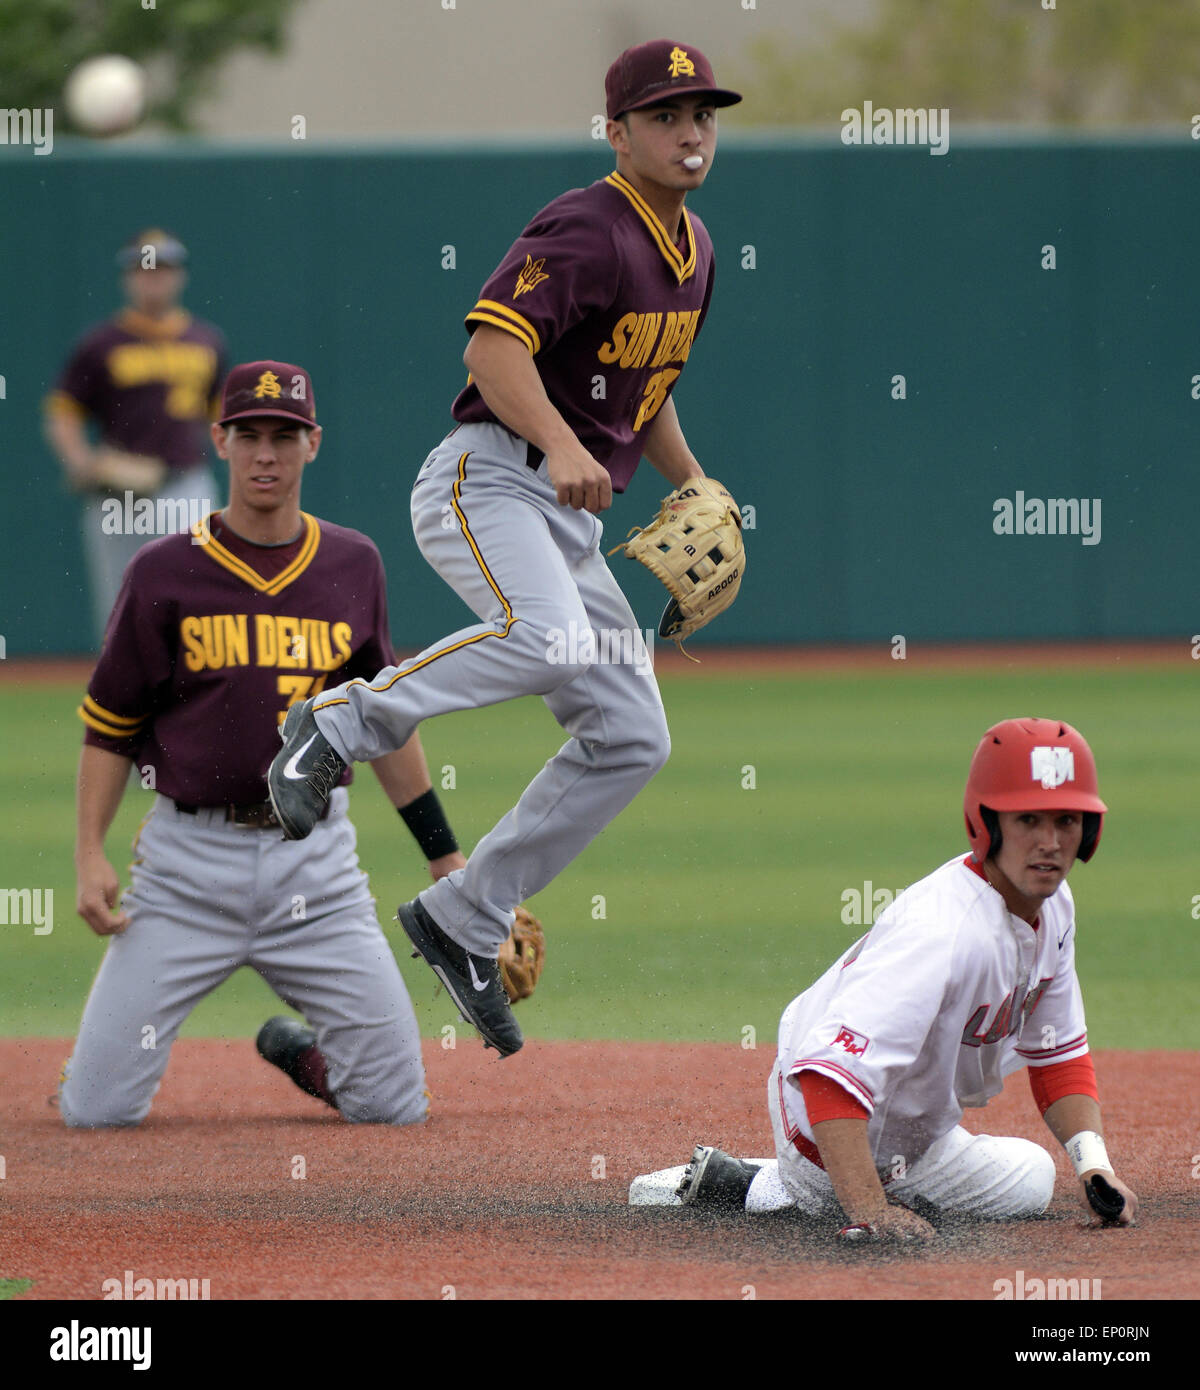 Usa. 12th May, 2015. SPORTS -- The Lobo's Hayden Schilling looks back to first base after Arizona State's Trevor Horn, left, and Jordan Aboites made the play at second base and the double play to first to throw out UNM's Lane Milligan in the third inning of th game at Lobo Field on Tuesday, May 12, 2015. © Greg Sorber/Albuquerque Journal/ZUMA Wire/Alamy Live News Stock Photo